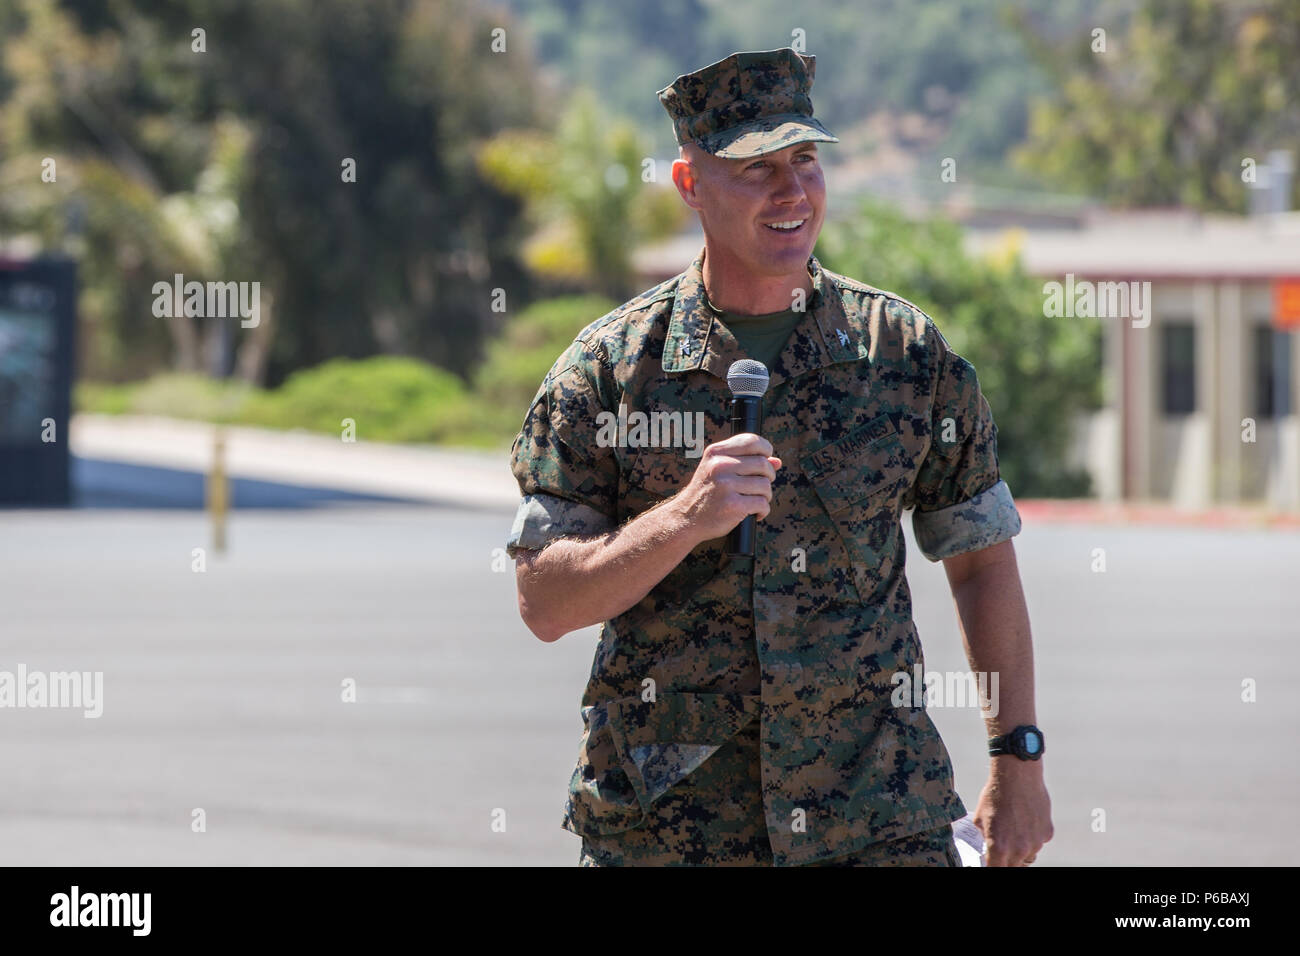 180625-M-BH464-1004  U.S. Marine Corps Col. Kyle Stoddard, commanding officer, School of Infantry-West (SOI-W), speaks during a change of command ceremony at SOI-West, Marine Corps Base Camp Pendleton, California, June 25, 2018. Prior to his arrival at SOI-W, Stoddard deployed in support of Operation Iraqi Freedom and was the battalion landing team operations officer with the 13th Marine Expeditionary Unit. (U.S. Marine Corps photo by Lance Cpl. Drake Nickels) Stock Photo